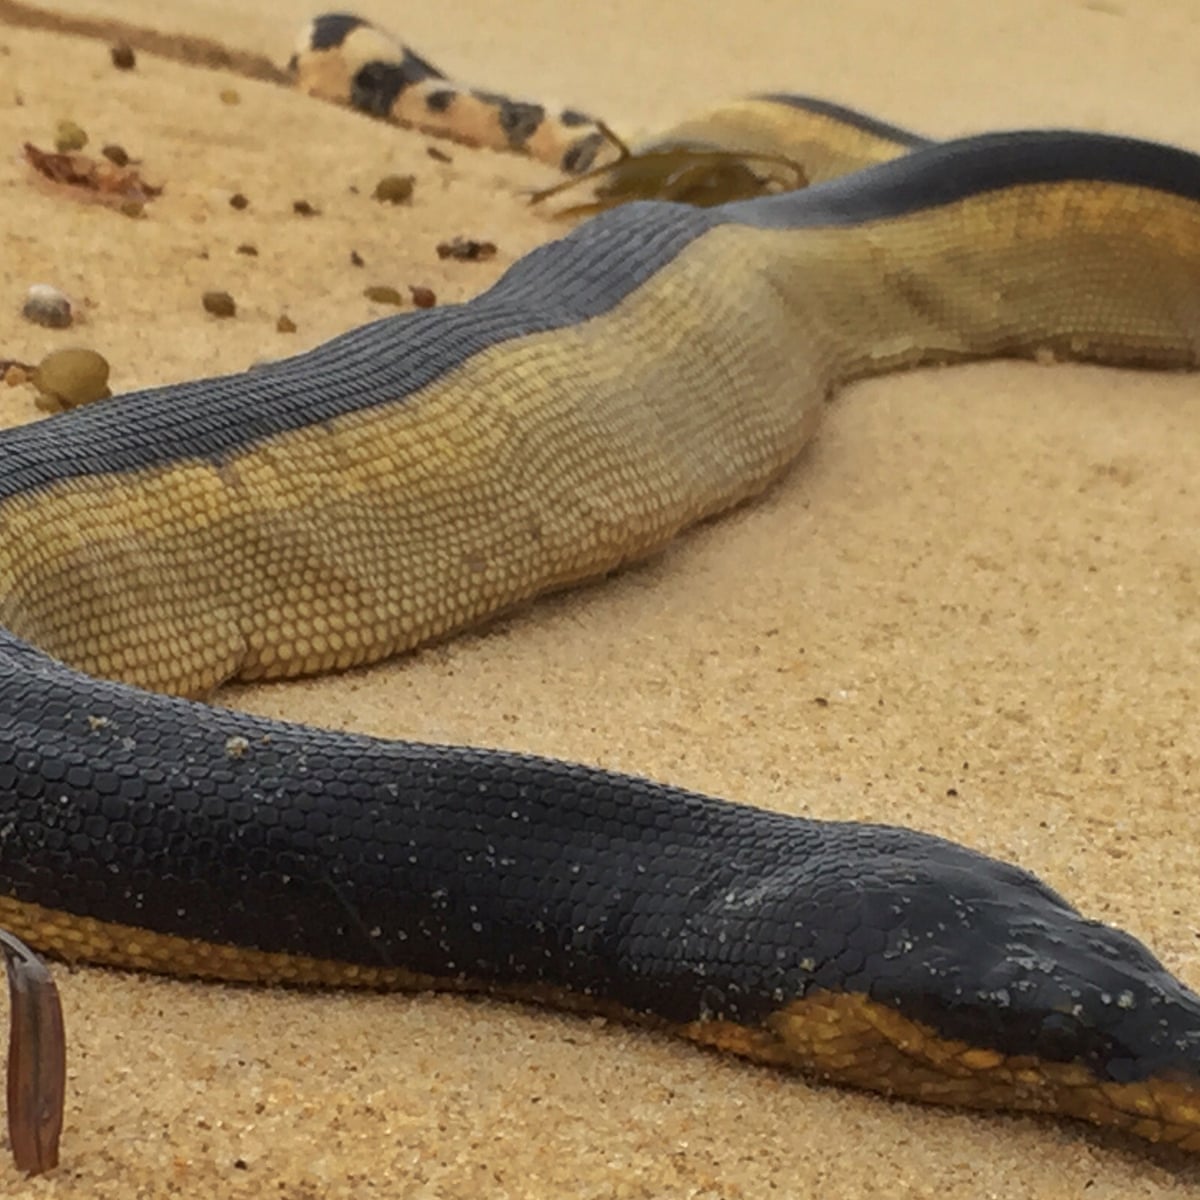 Venomous tropical sea snakes wash up on Australian beaches after storms |  Snakes | The Guardian